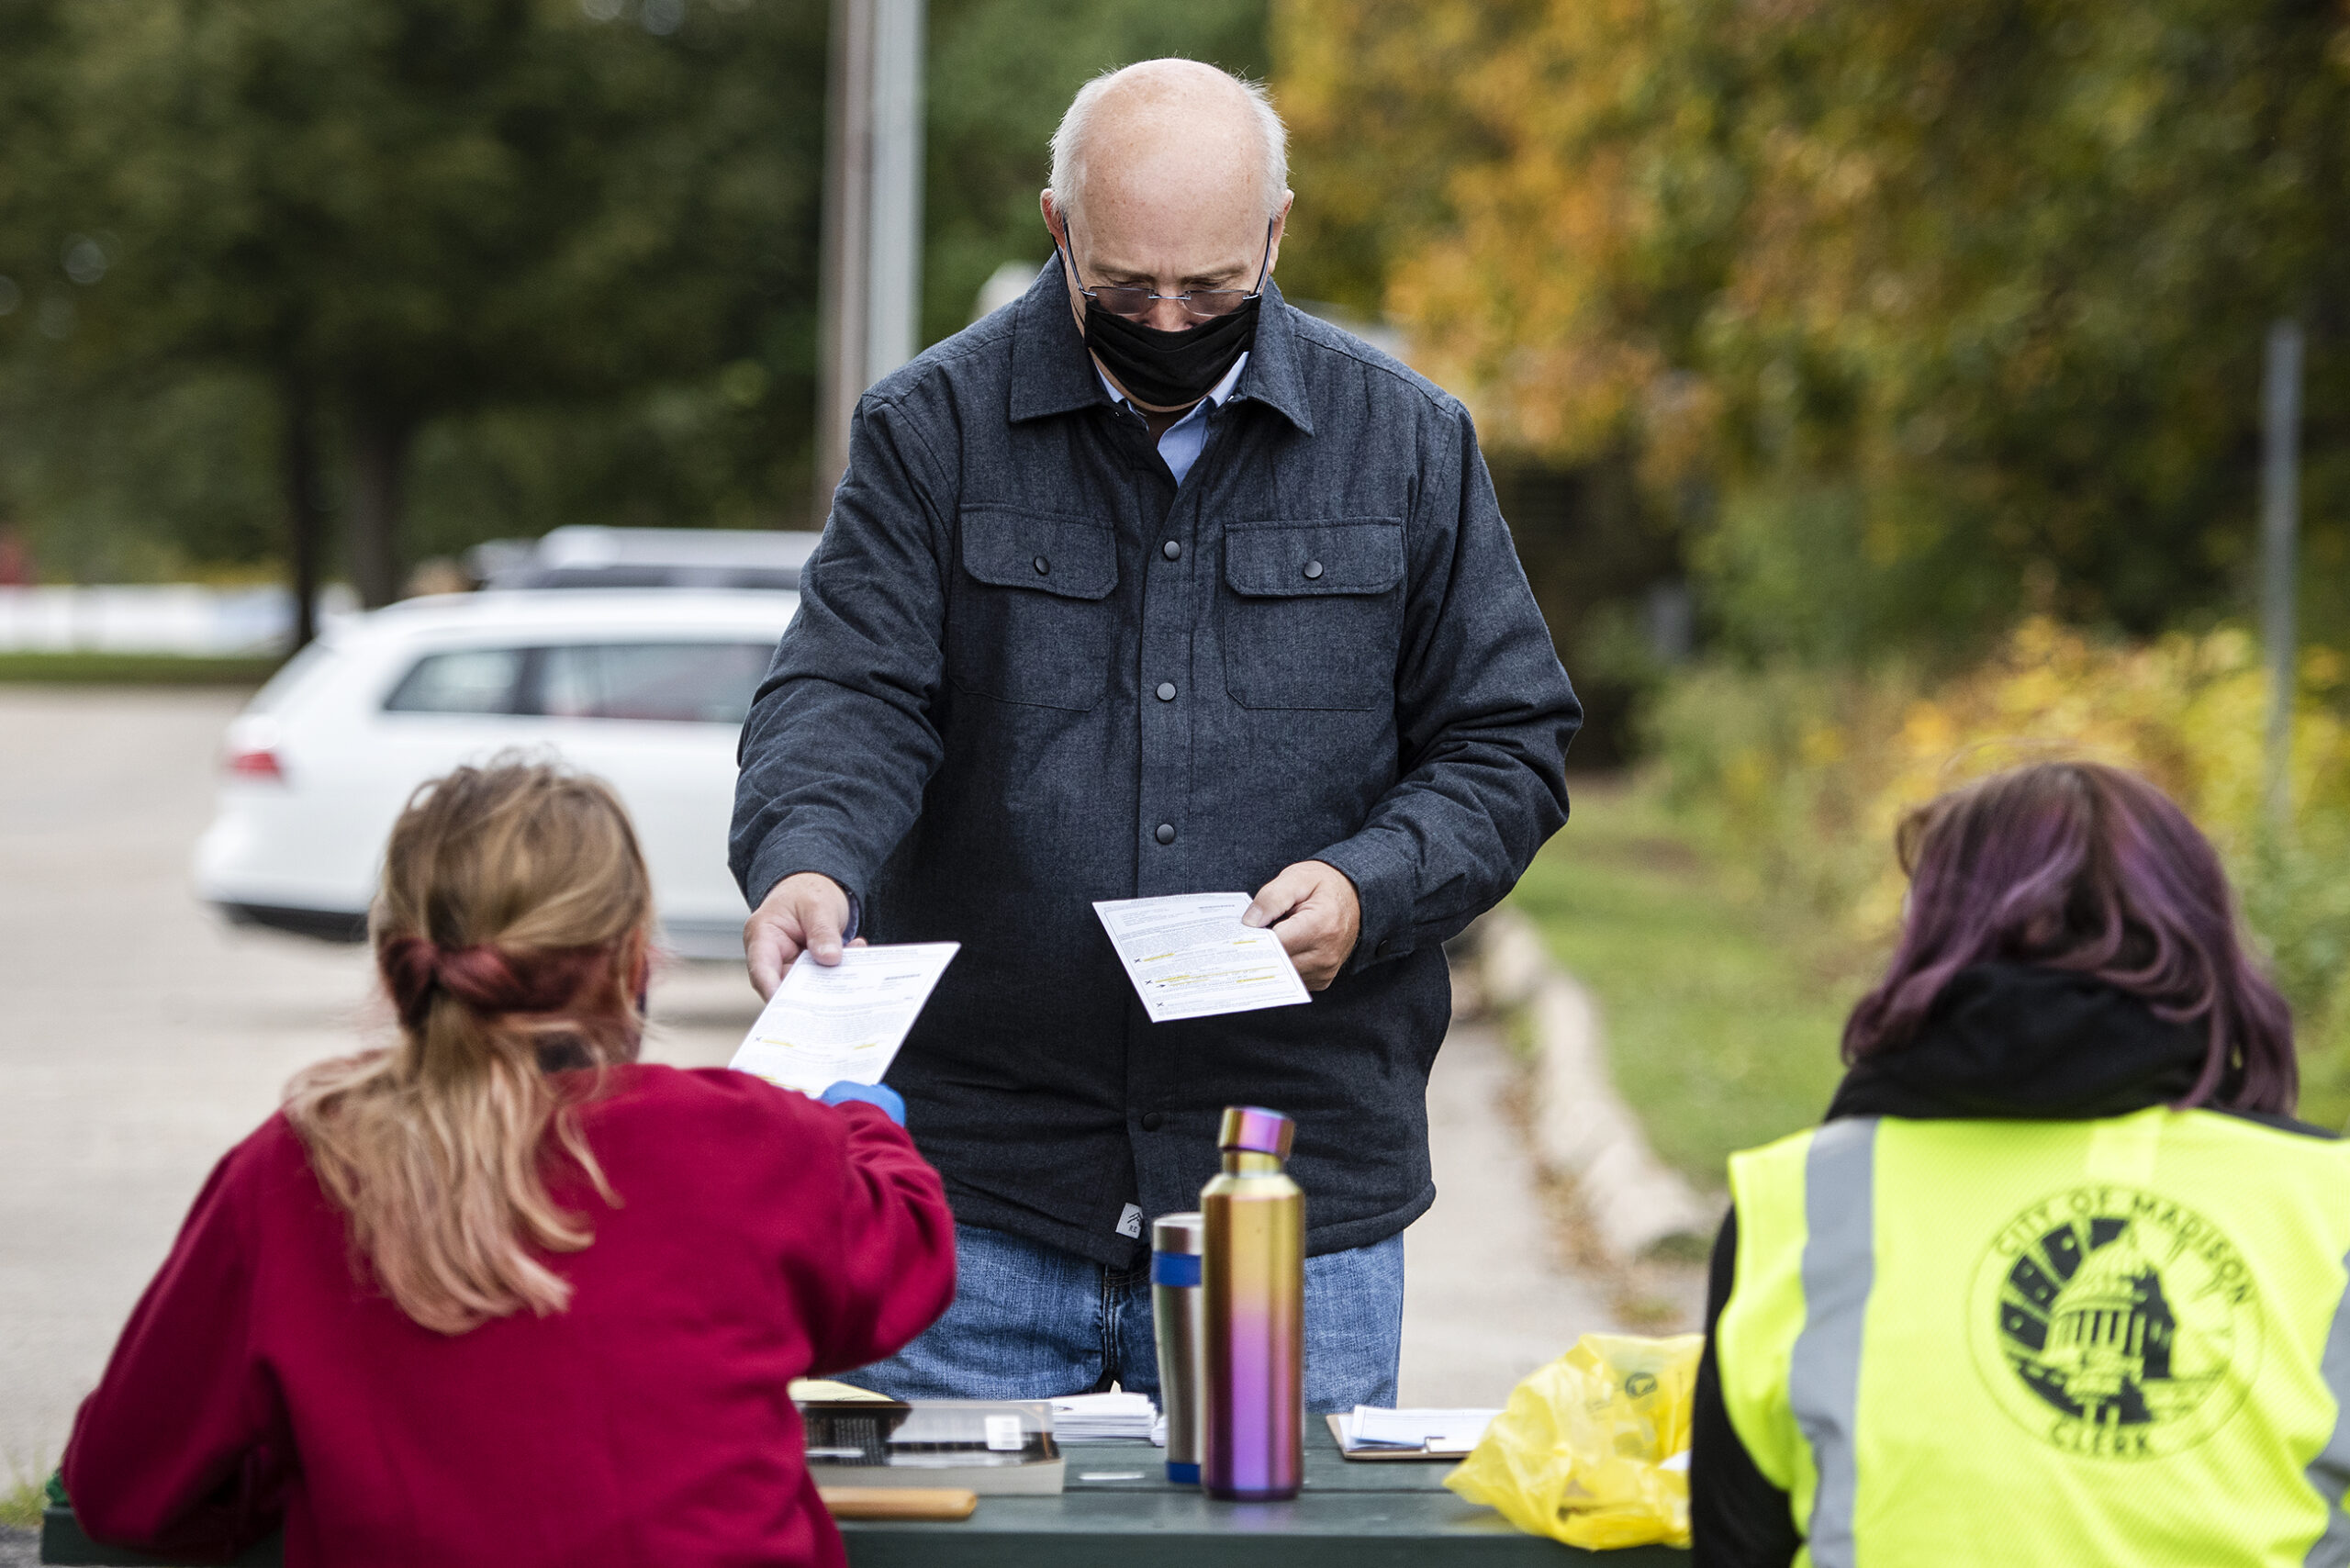 A man hands ballots to workers at a park table